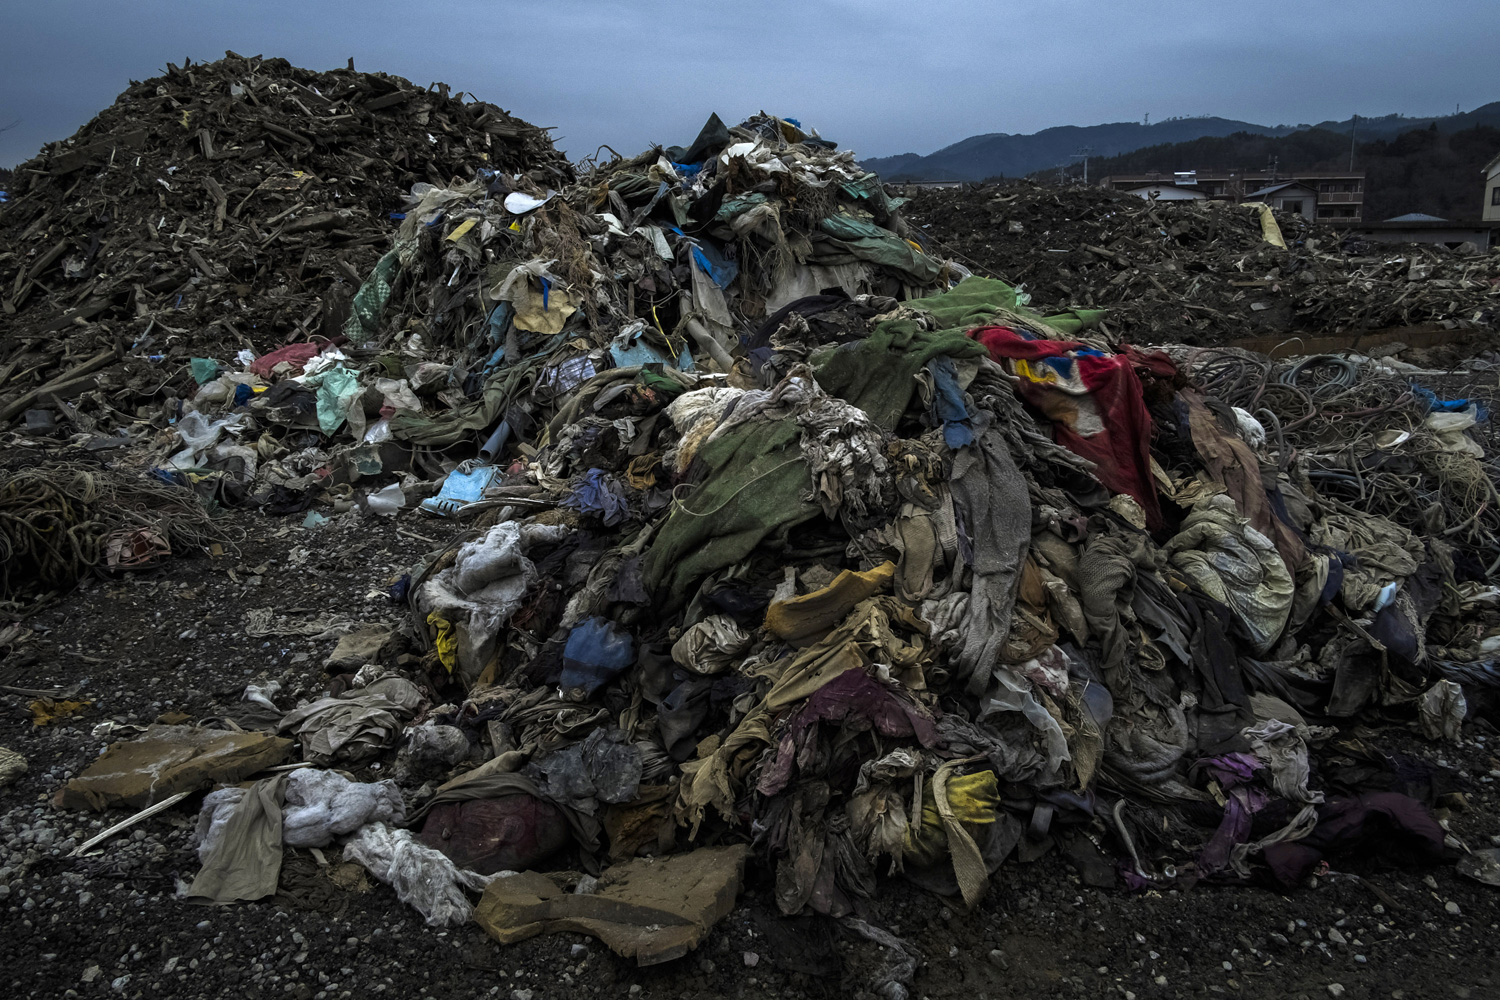 March 8, 2012. Debris and non recyclable home items lay strewn over the ground where houses and factories once stood in Kesennuma, Japan.